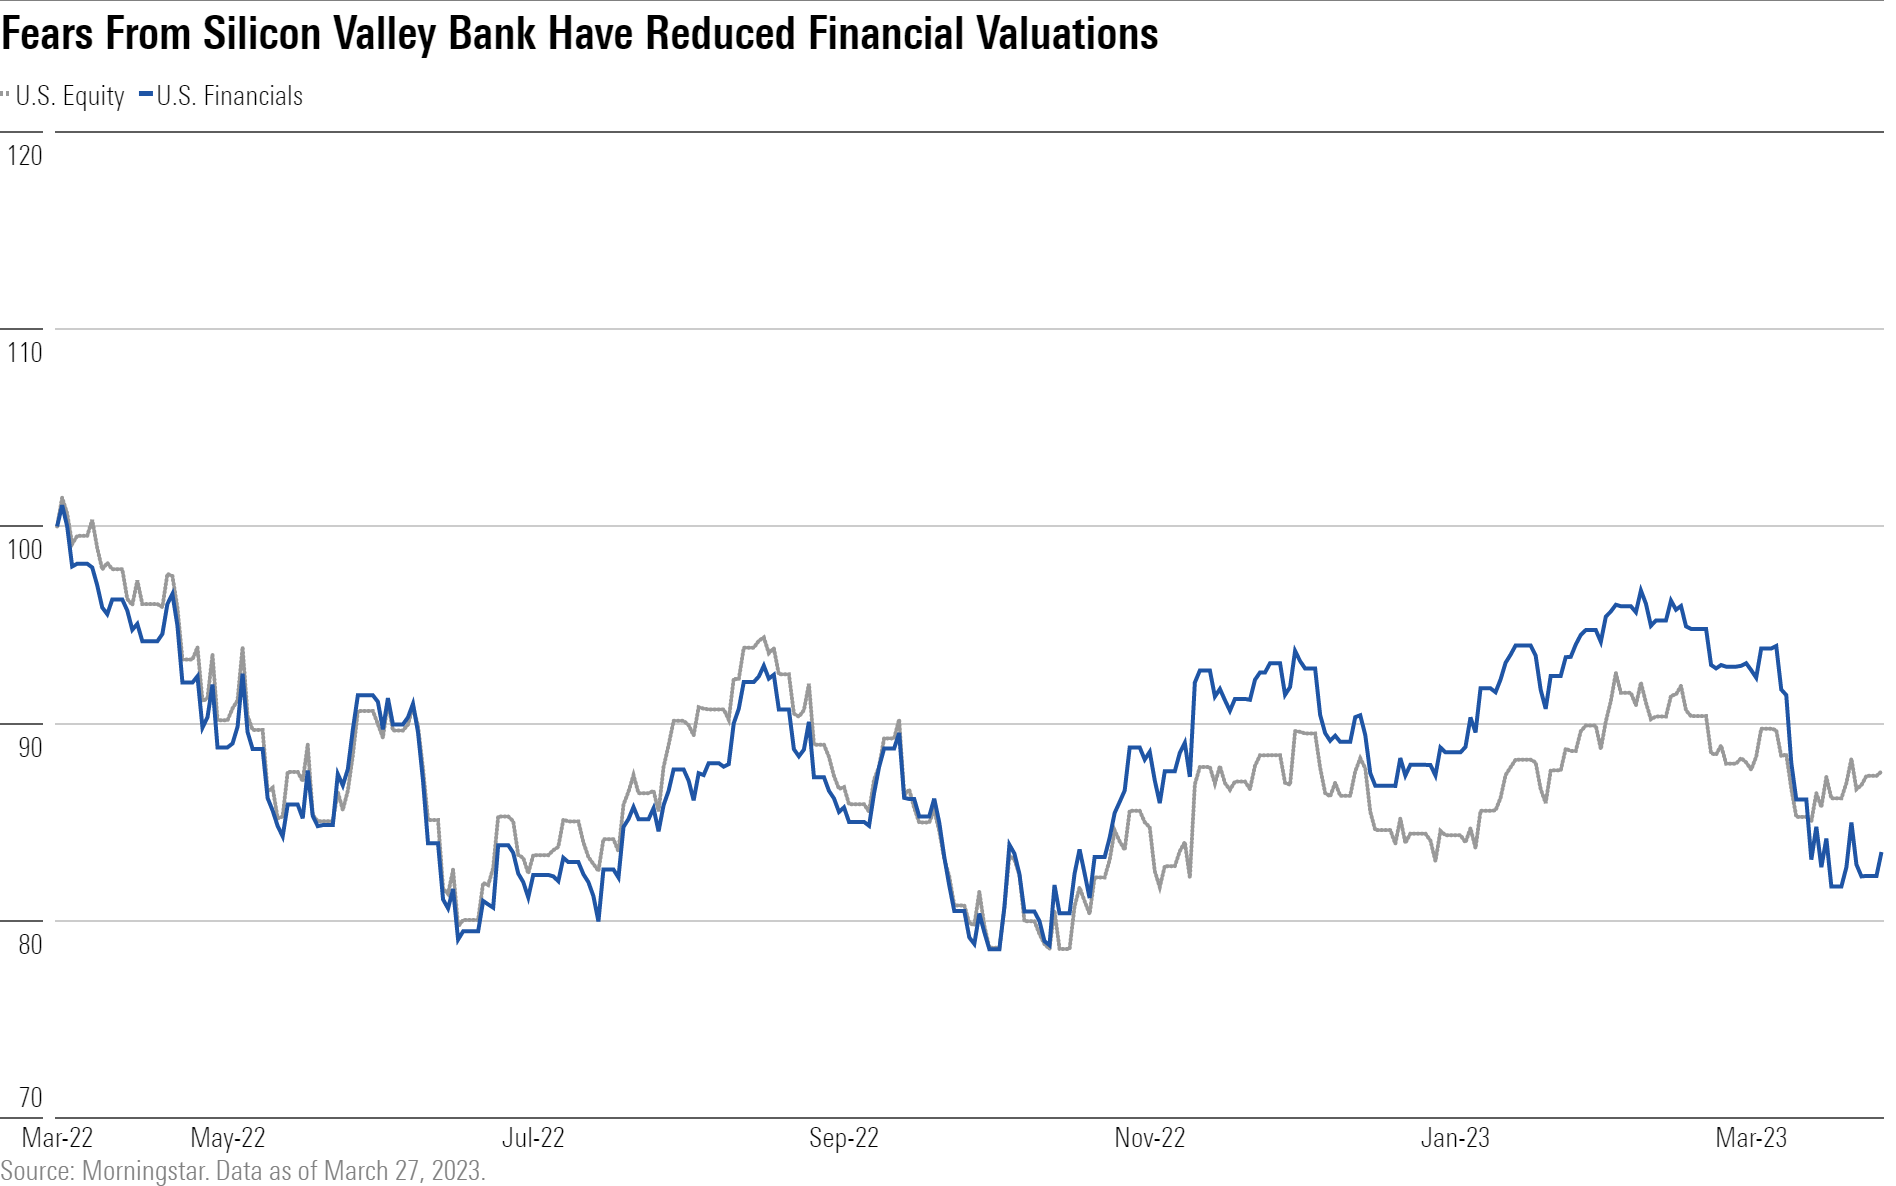 Fears From Silicon Valley Bank Have Reduced Financial Valuations